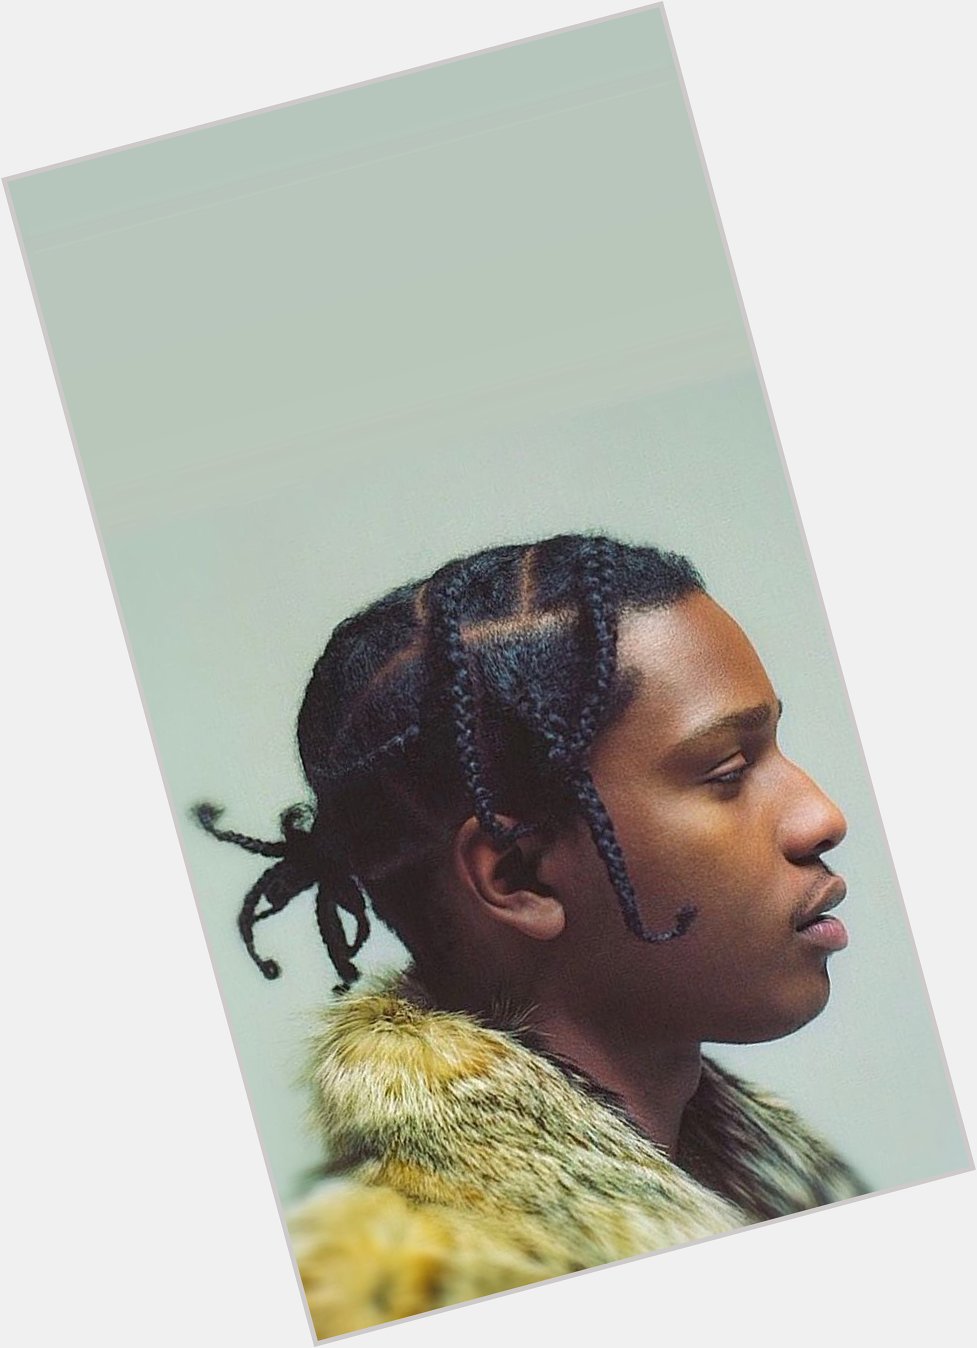 ASAP ROCKY turned 34 Today, happy birthday to him What Rocky s track is you playing today? 